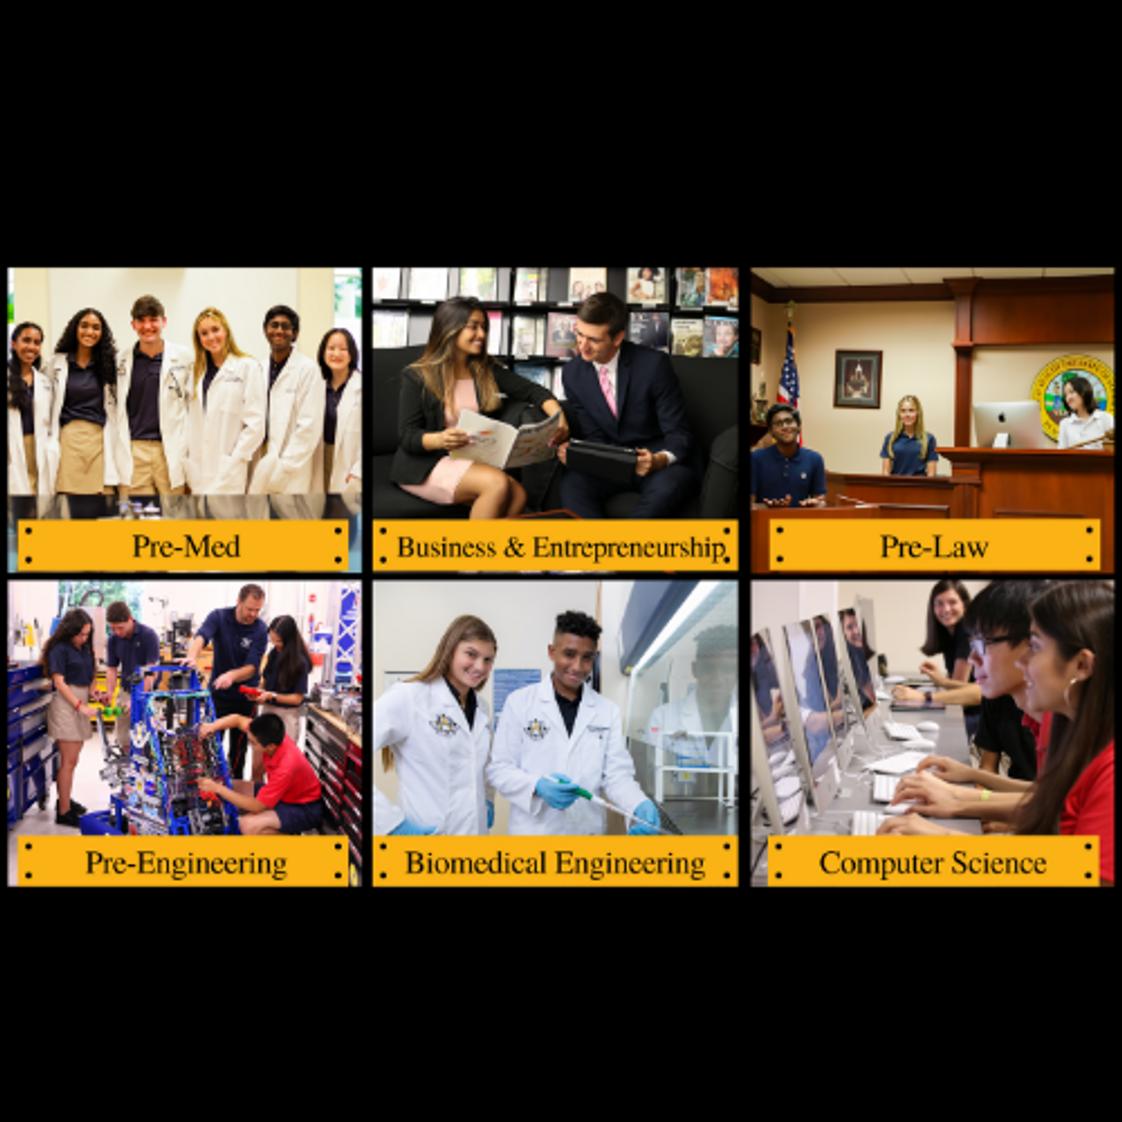 American Heritage Schools, Broward Campus Photo - Over the past twenty years, American Heritage Schools has developed six distinct professional programs in biomedical engineering, business, computer science, engineering, law, and medicine. Each program is taught daily by professionals in their respective fields. The Heritage curriculum team, in conjunction with the lawyers, judges, doctors, entrepreneurs, and engineers that make up the pre-professional faculty, worked to create unique classes.